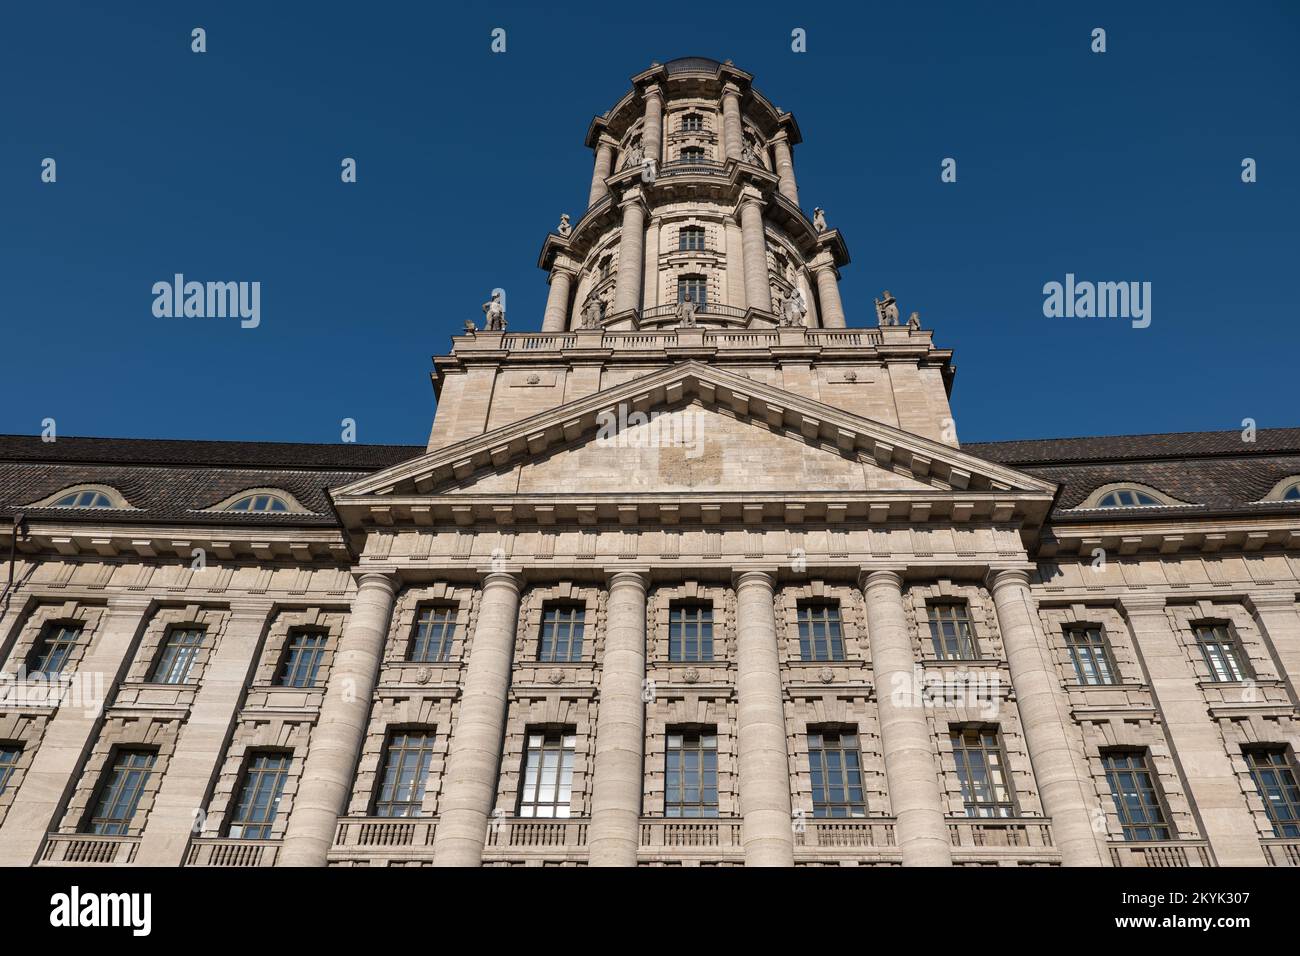 Germany, Berlin, Old City Hall (Altes Stadthaus), former administrative building designed by Ludwig Hoffmann, currently used by the Senate. Stock Photo